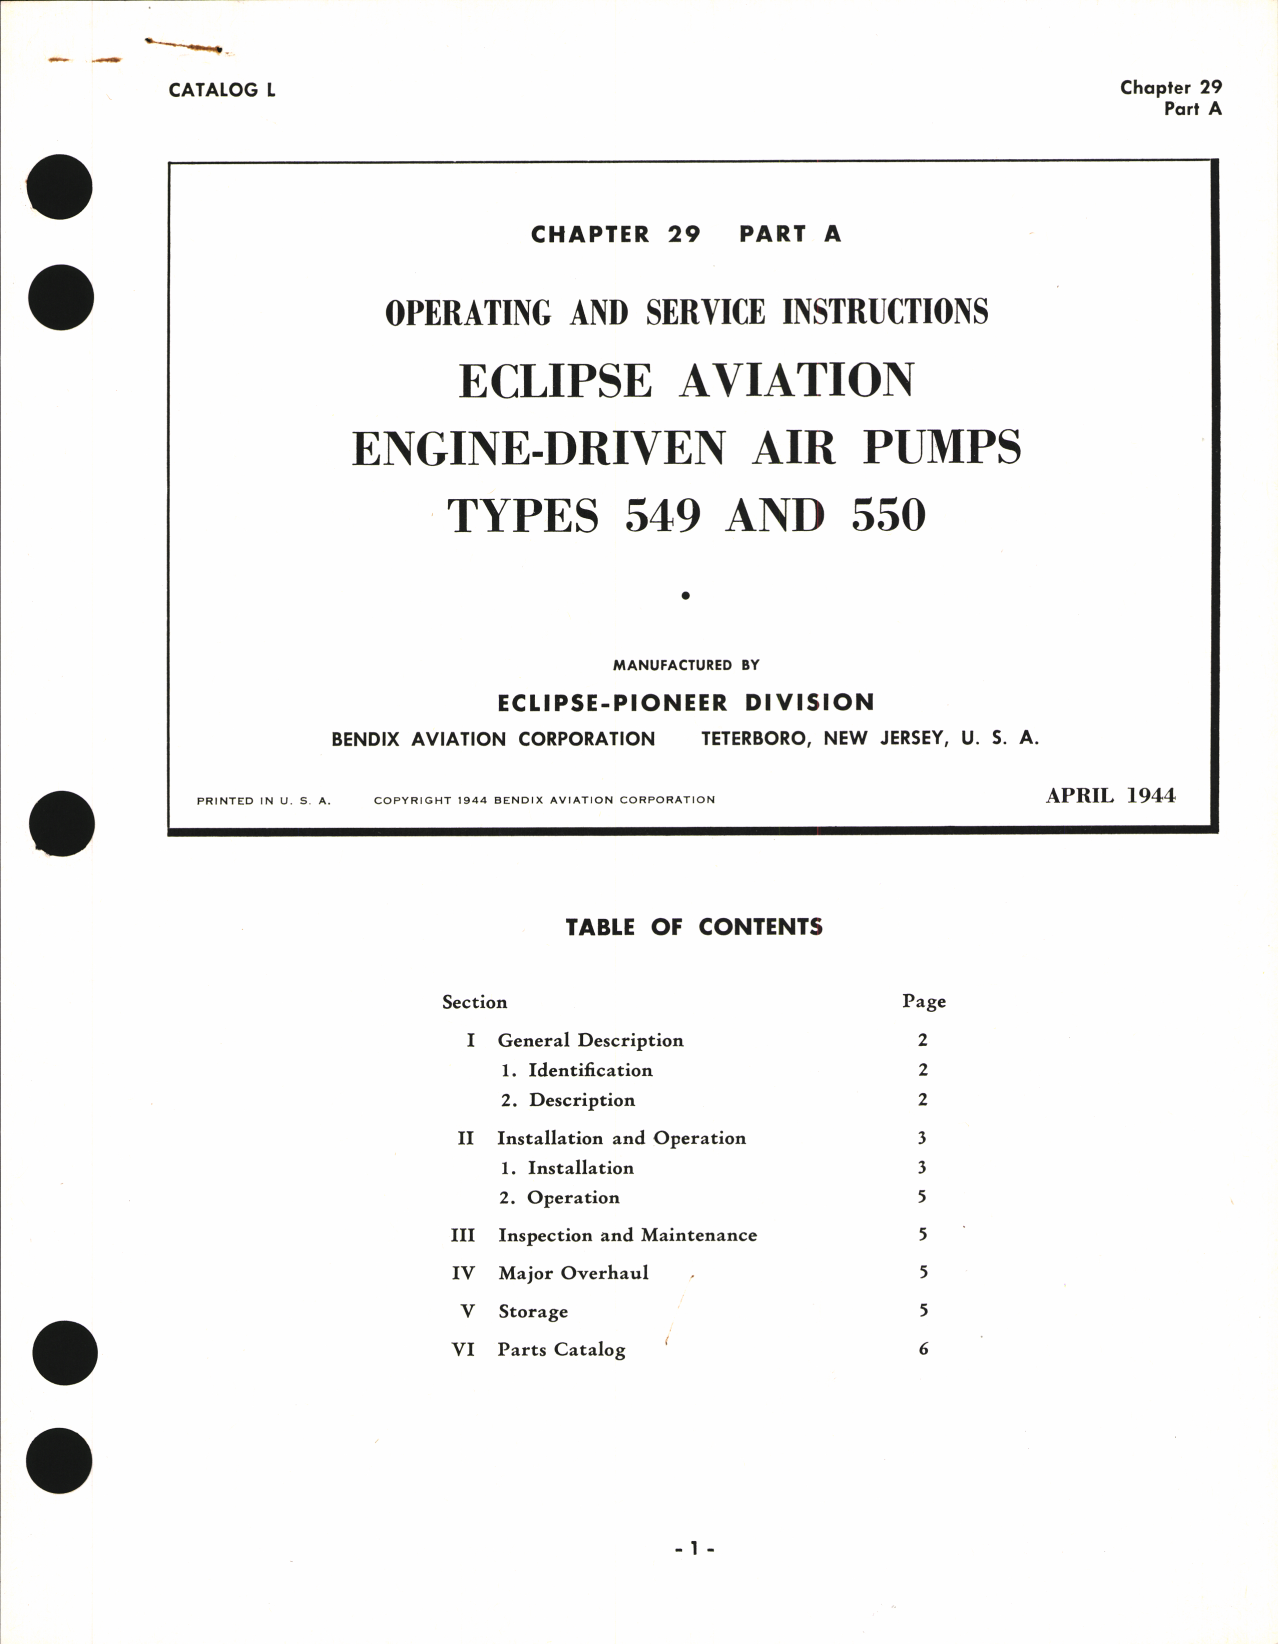 Sample page 1 from AirCorps Library document: Operating and Service Instructions for Eclipse Aviation Engine-Driven Air Pumps Types 549 and 550